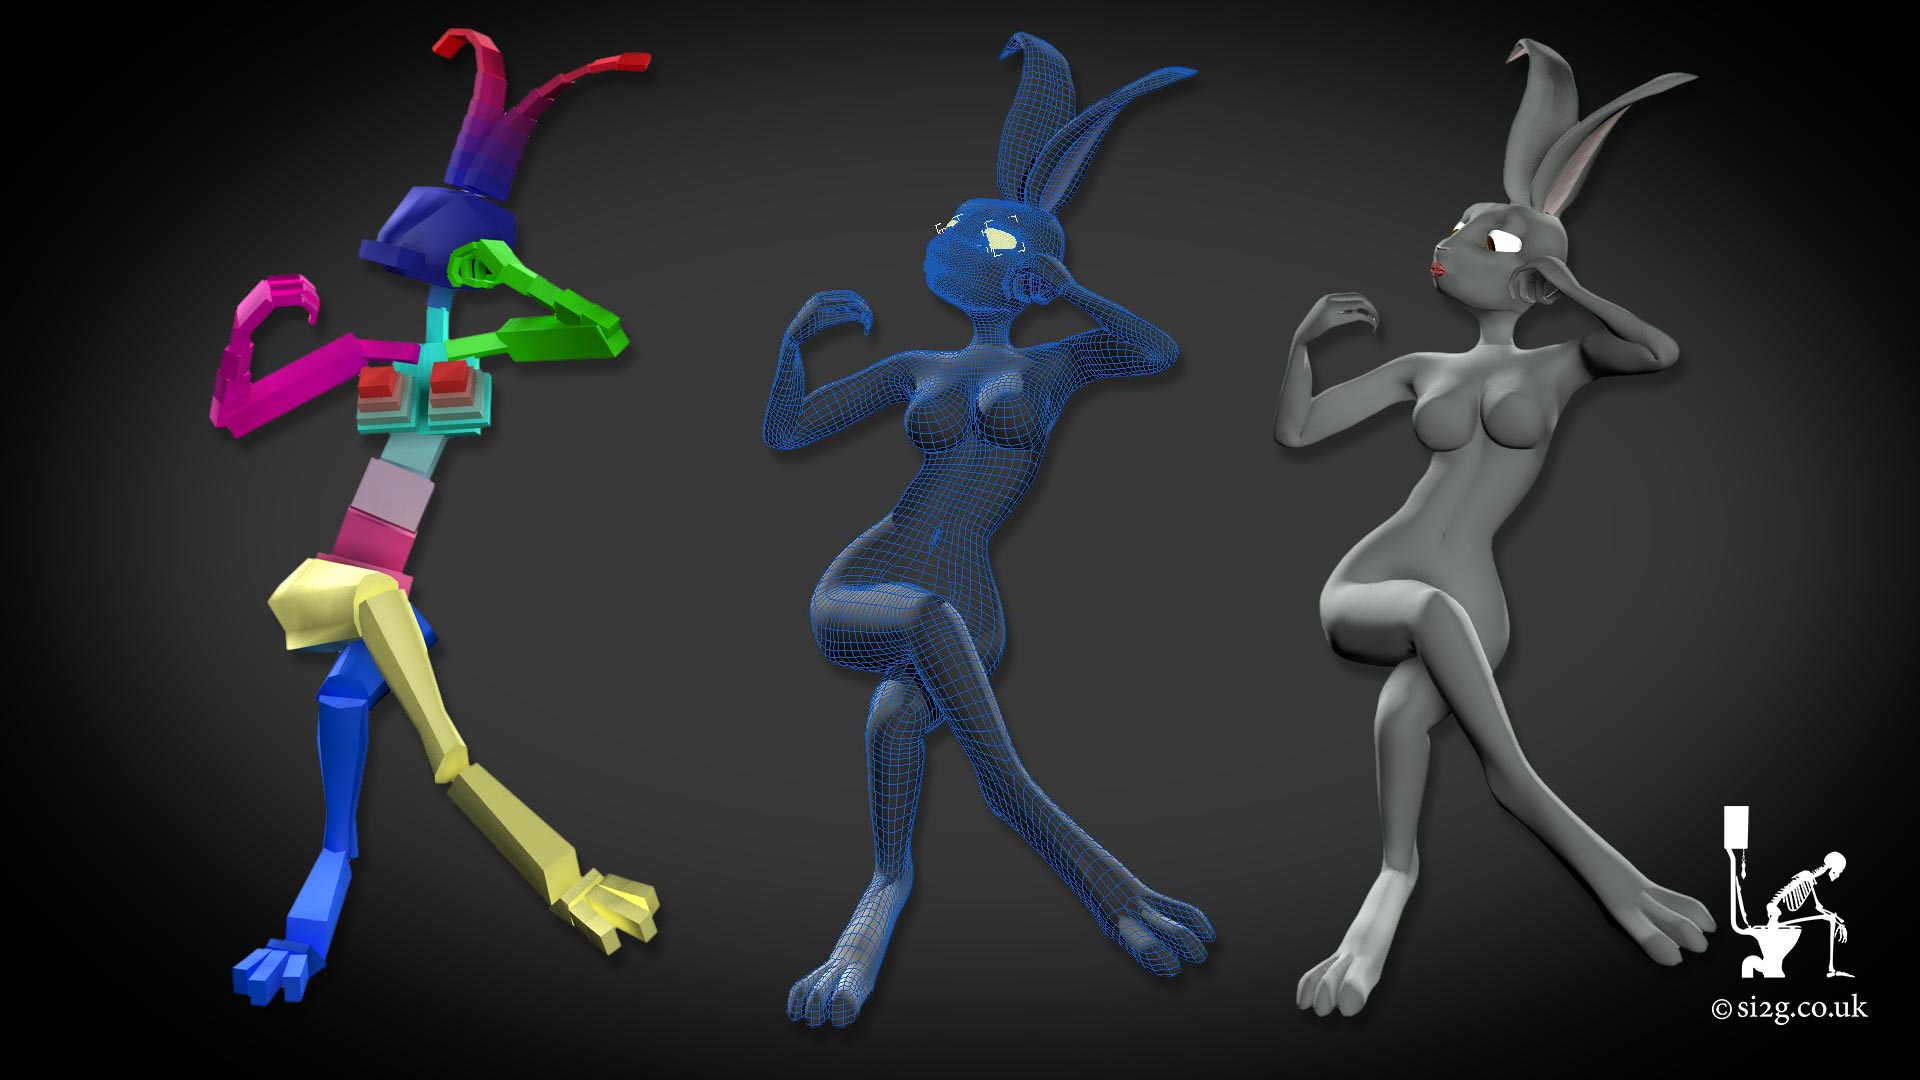 Bunny Girl - This is a behind-the-scenes breakdown of a 3D CGI character, designed for forth-coming animation.